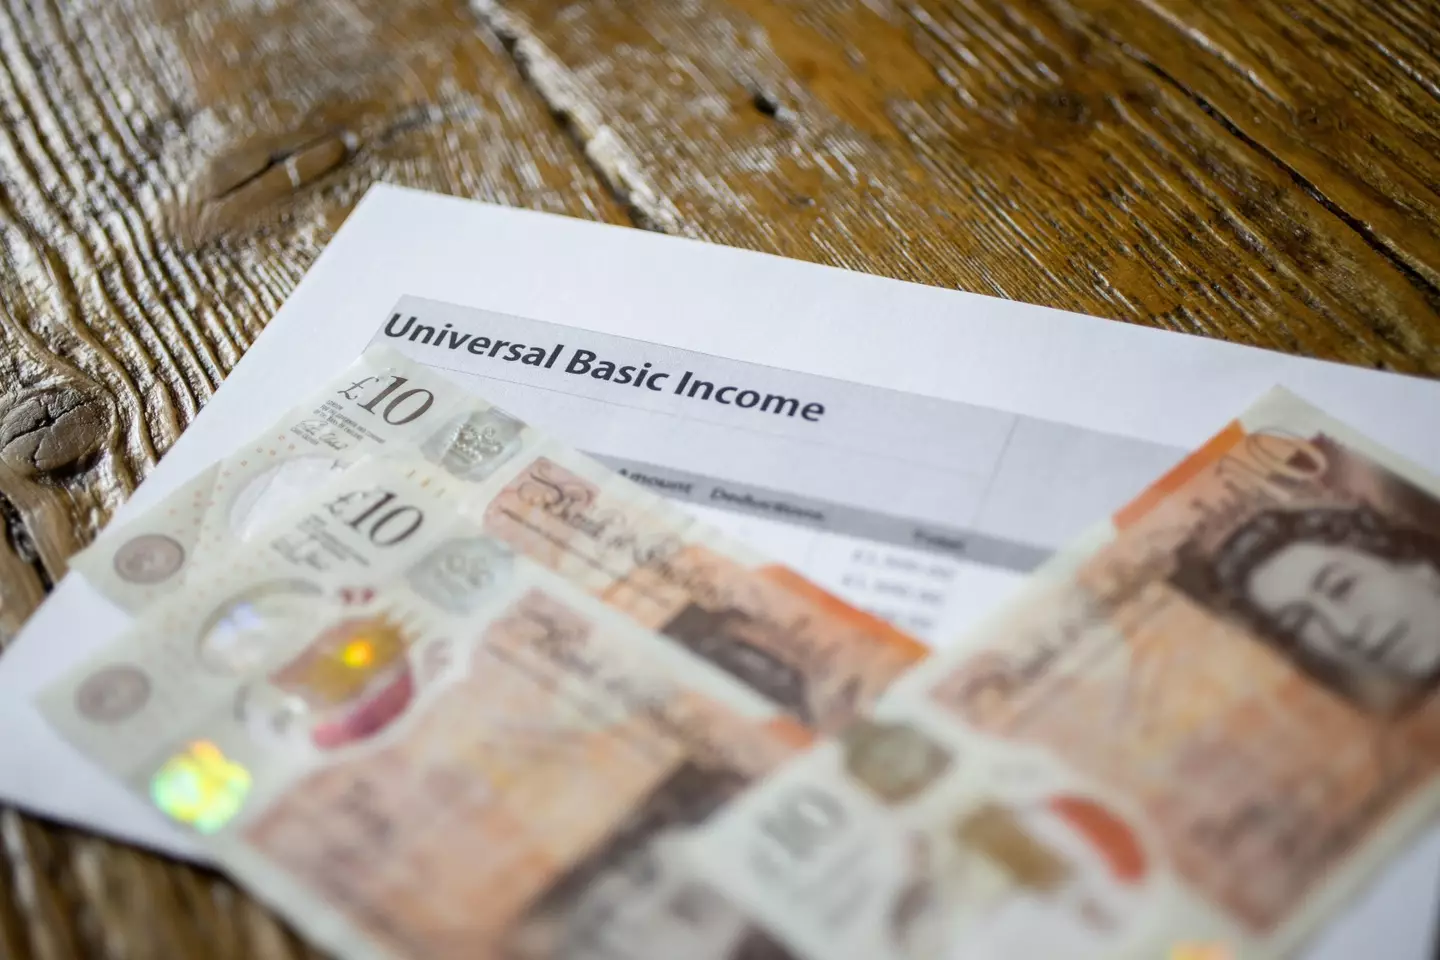 Wales launched its Universal Basic Income trial last year.